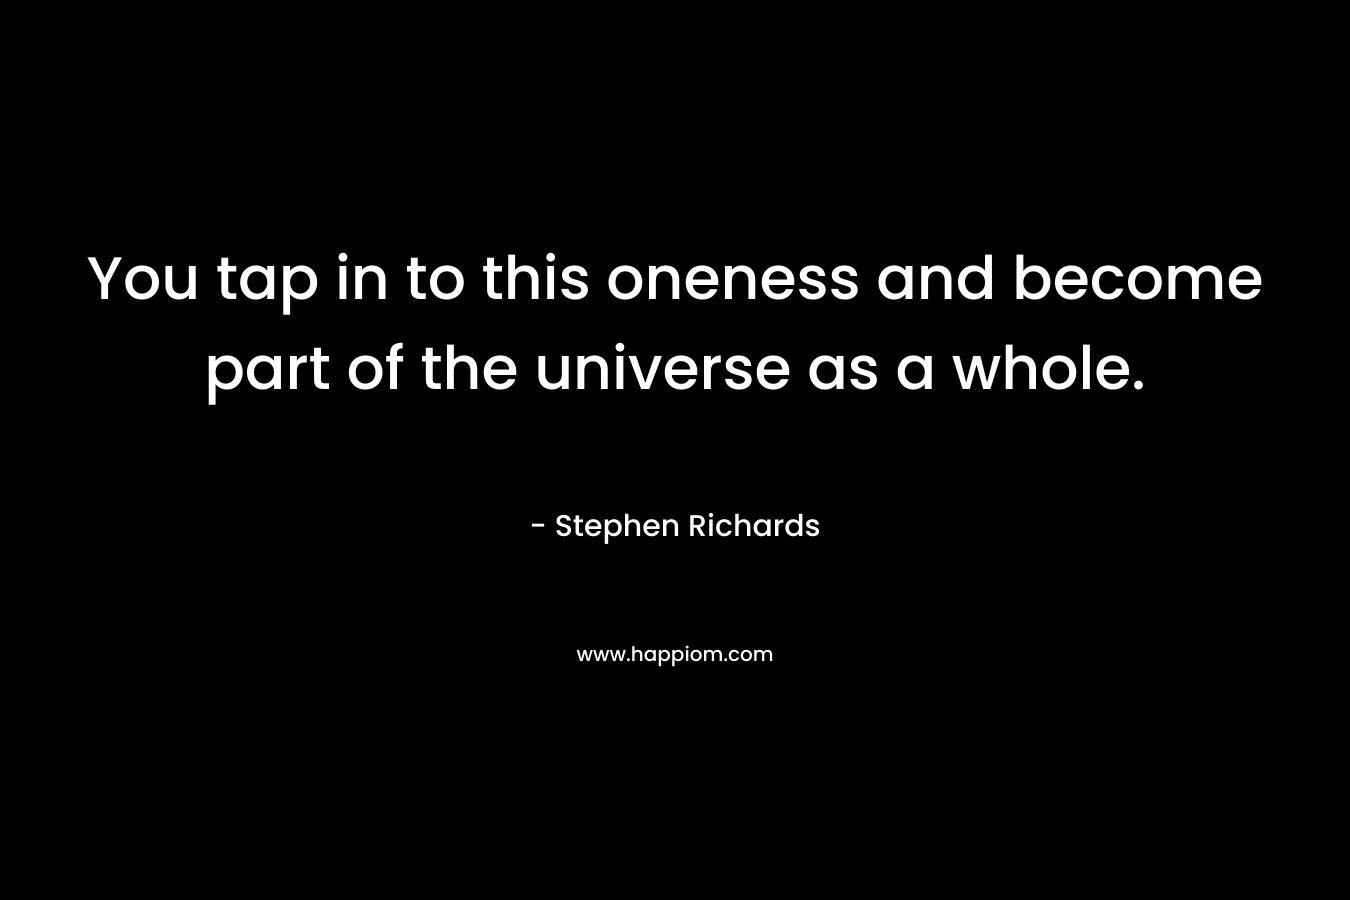 You tap in to this oneness and become part of the universe as a whole. – Stephen Richards